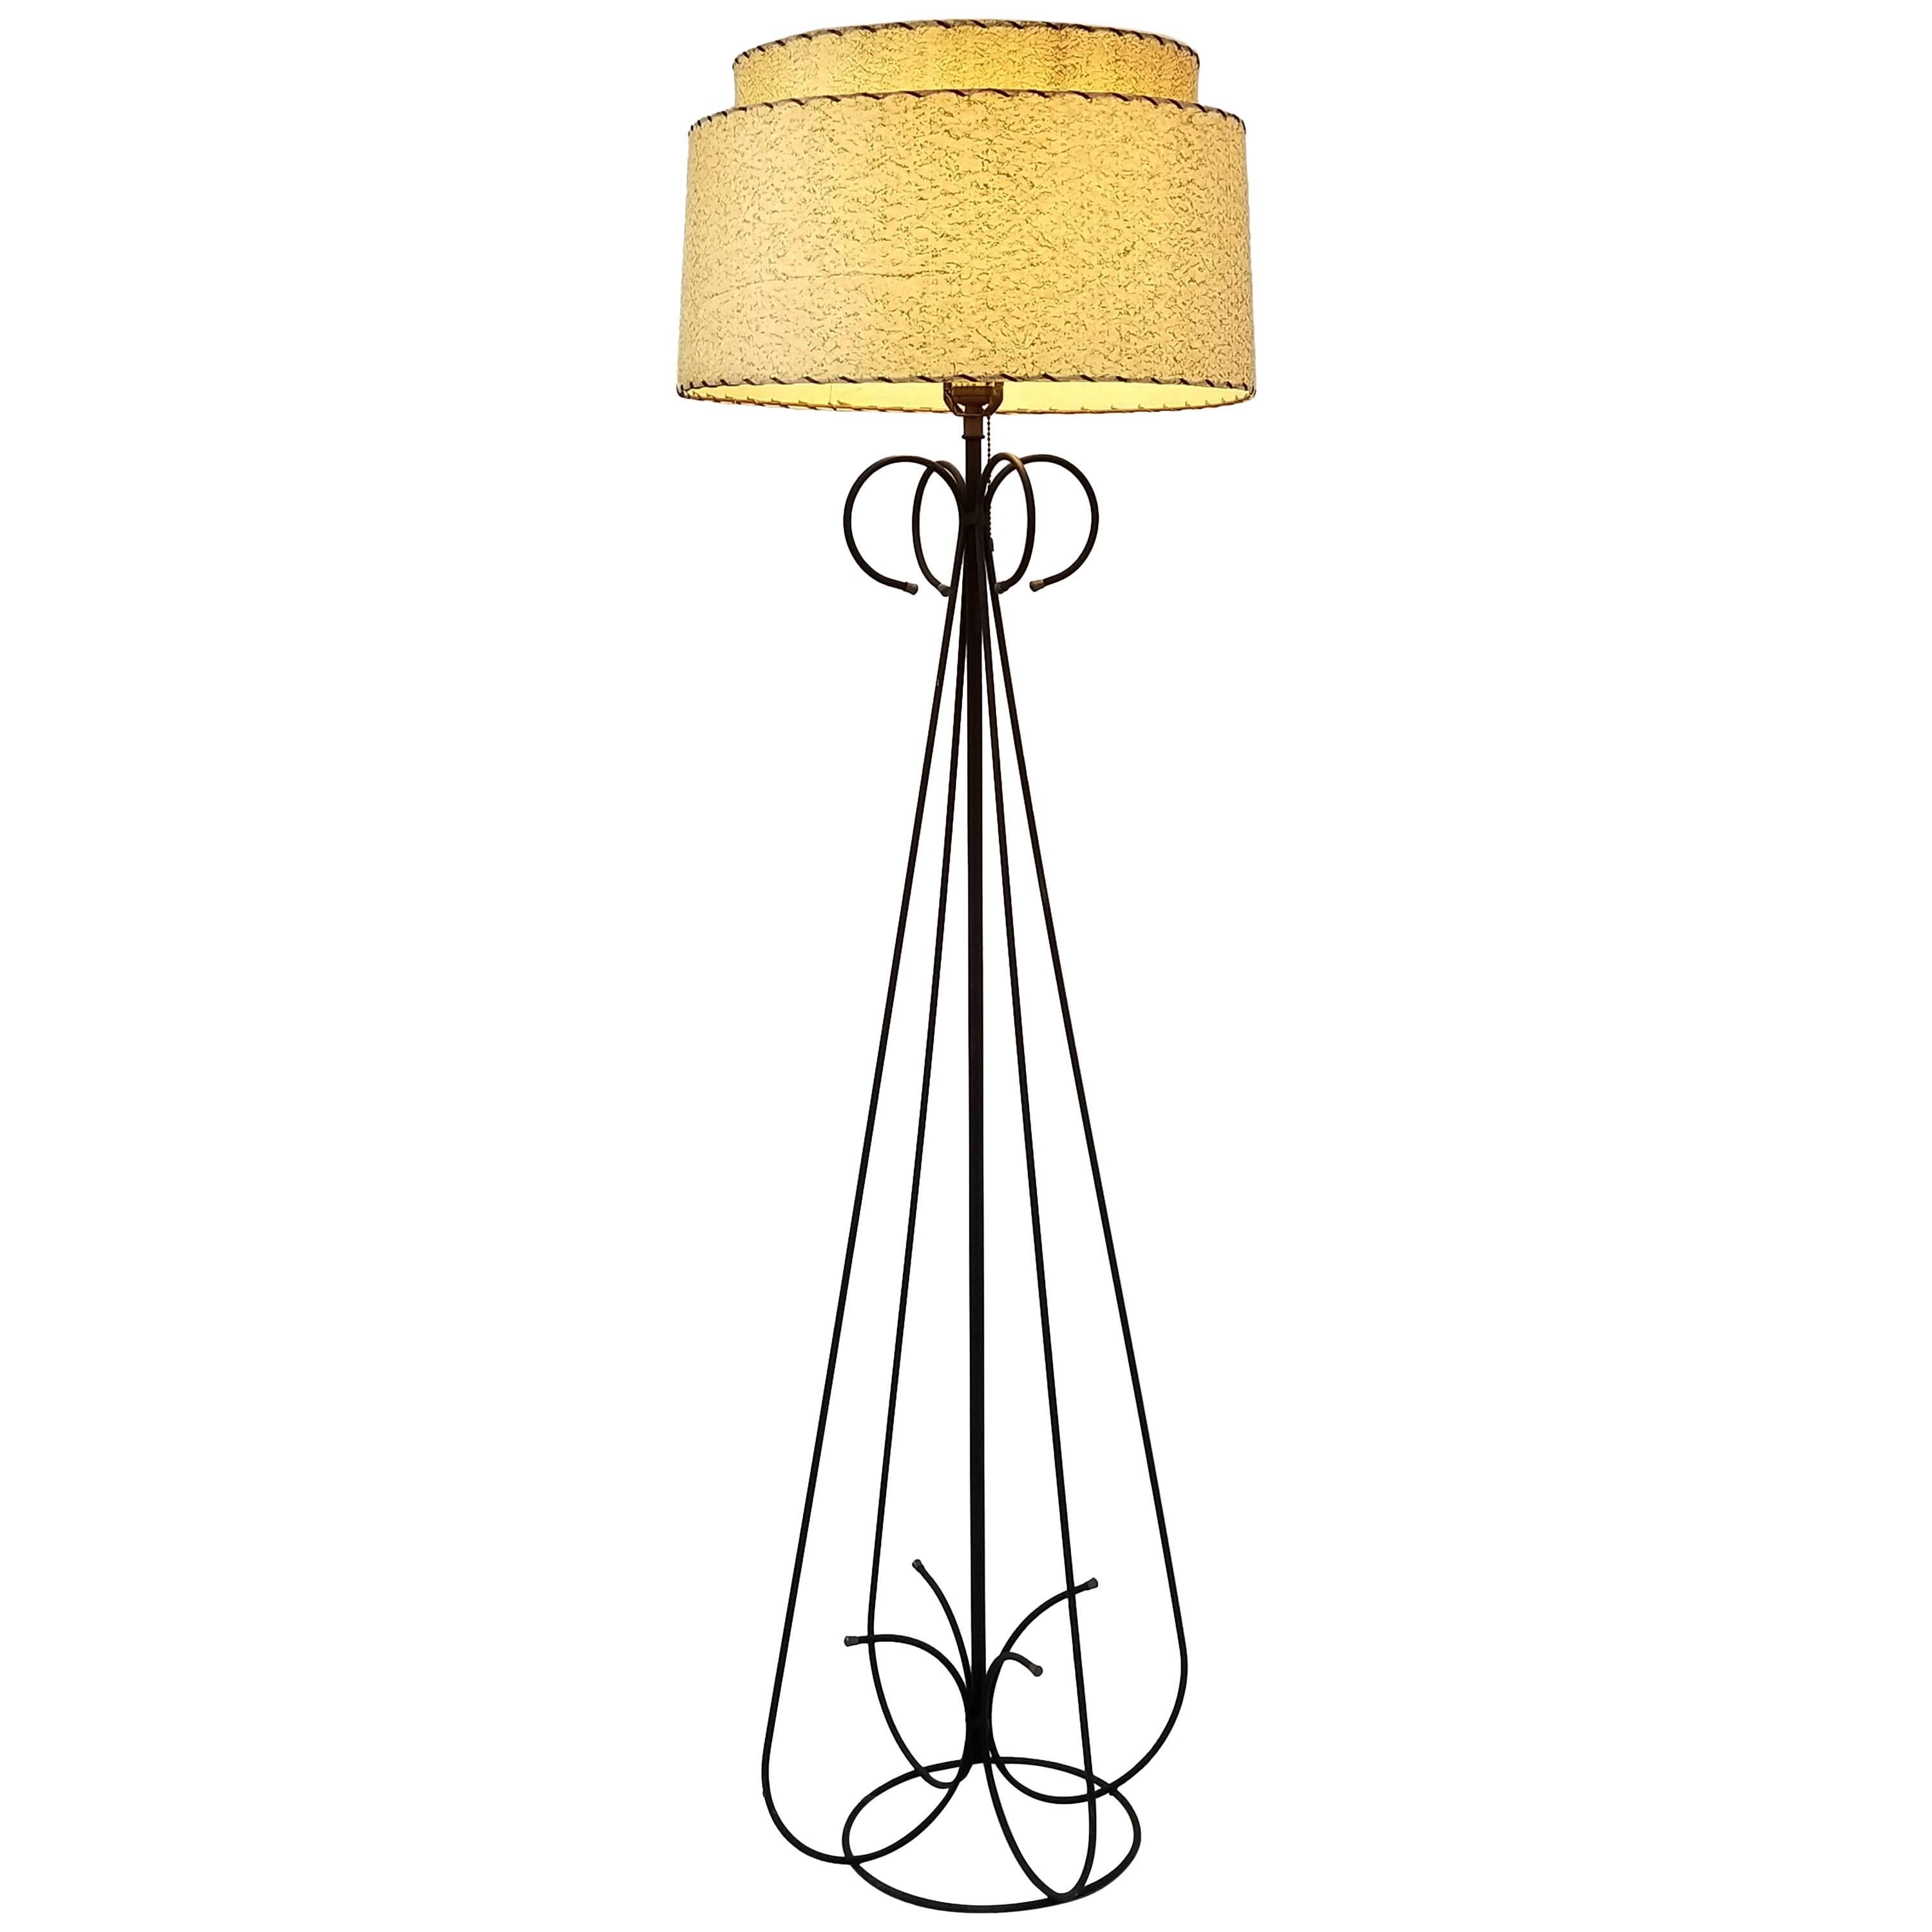 1950s Wire Floor Lamp in the Style of Tony Paul, USA